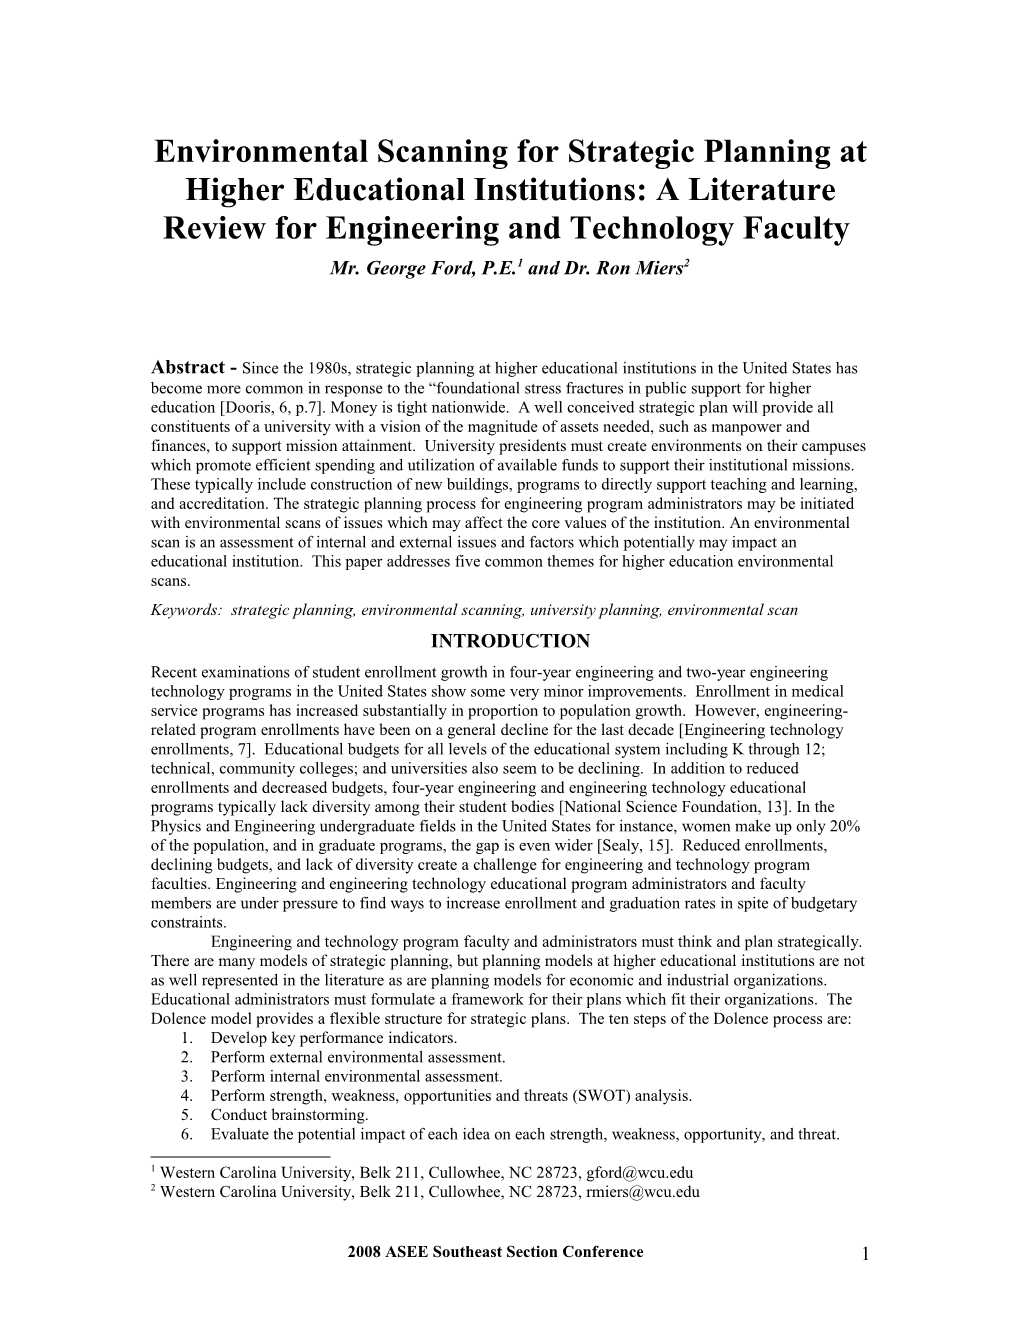 A Brief Introduction to Environmental Scanning for Higher Educational Institutions in North